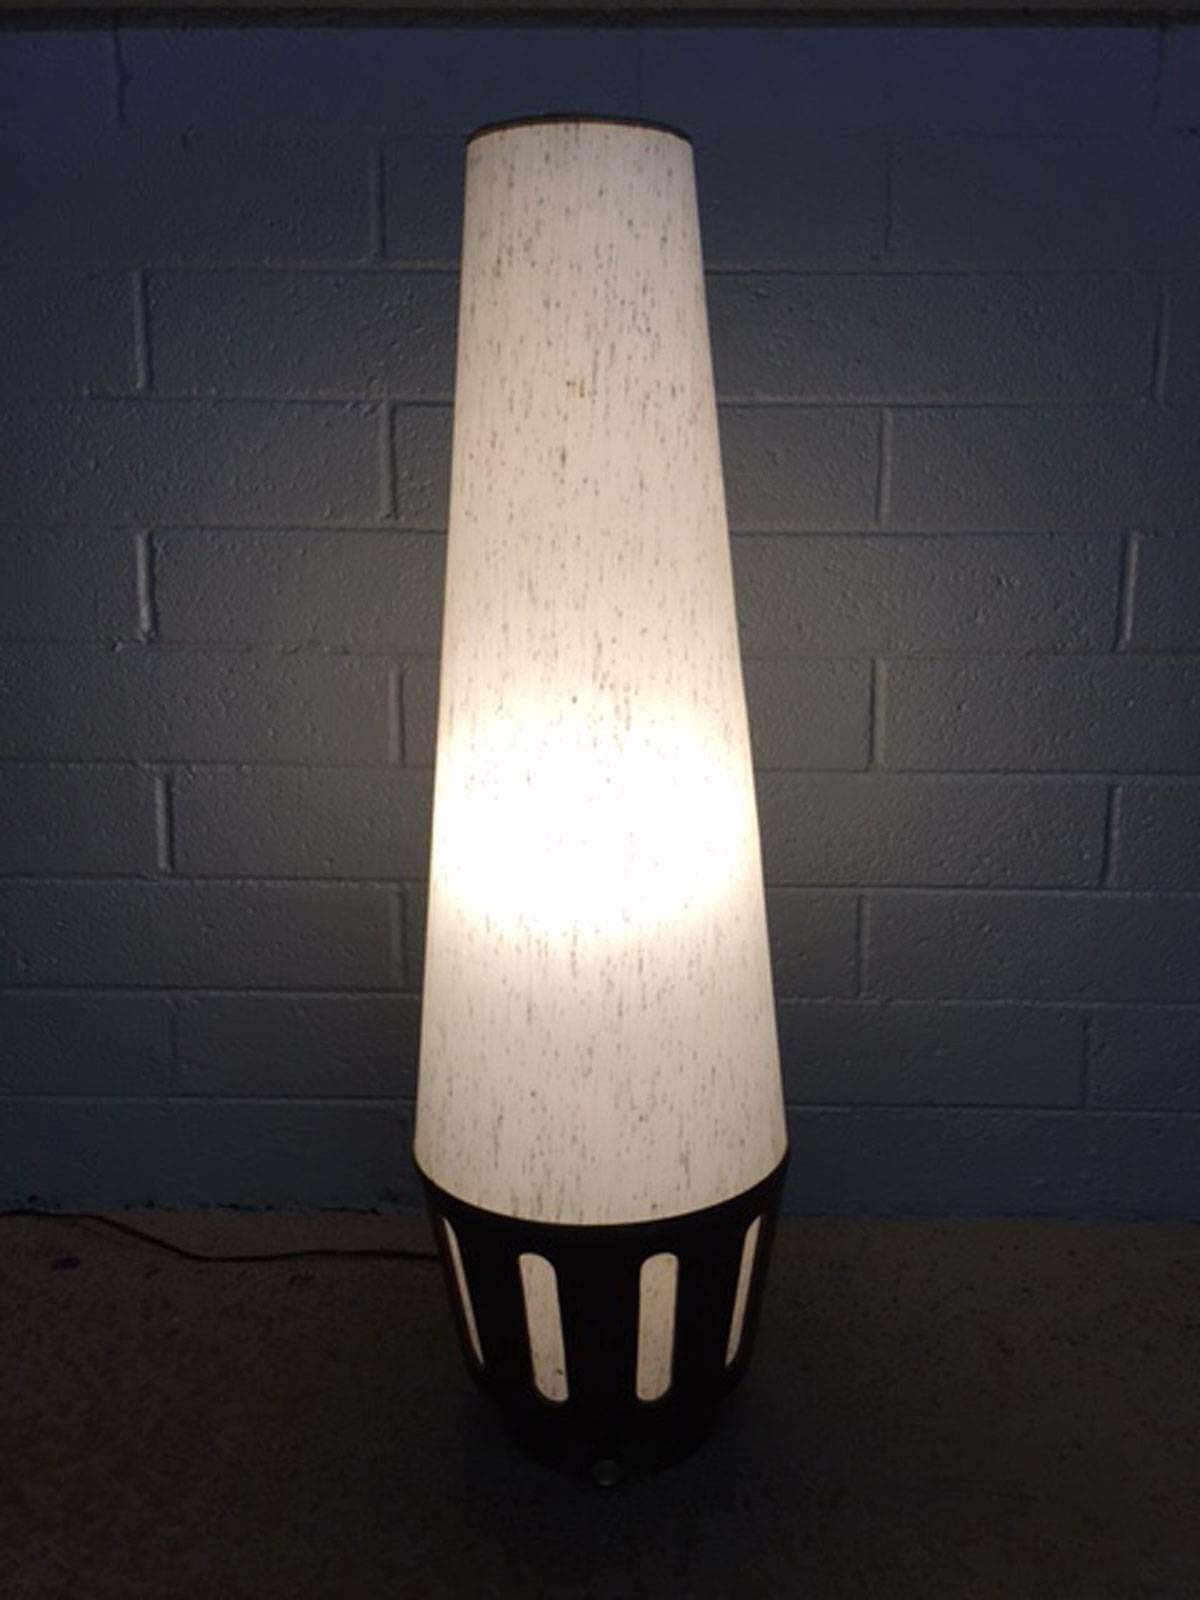 Attributed to Adrian Pearsall, circa 1960s cone style walnut base lamp with knob dimmer.